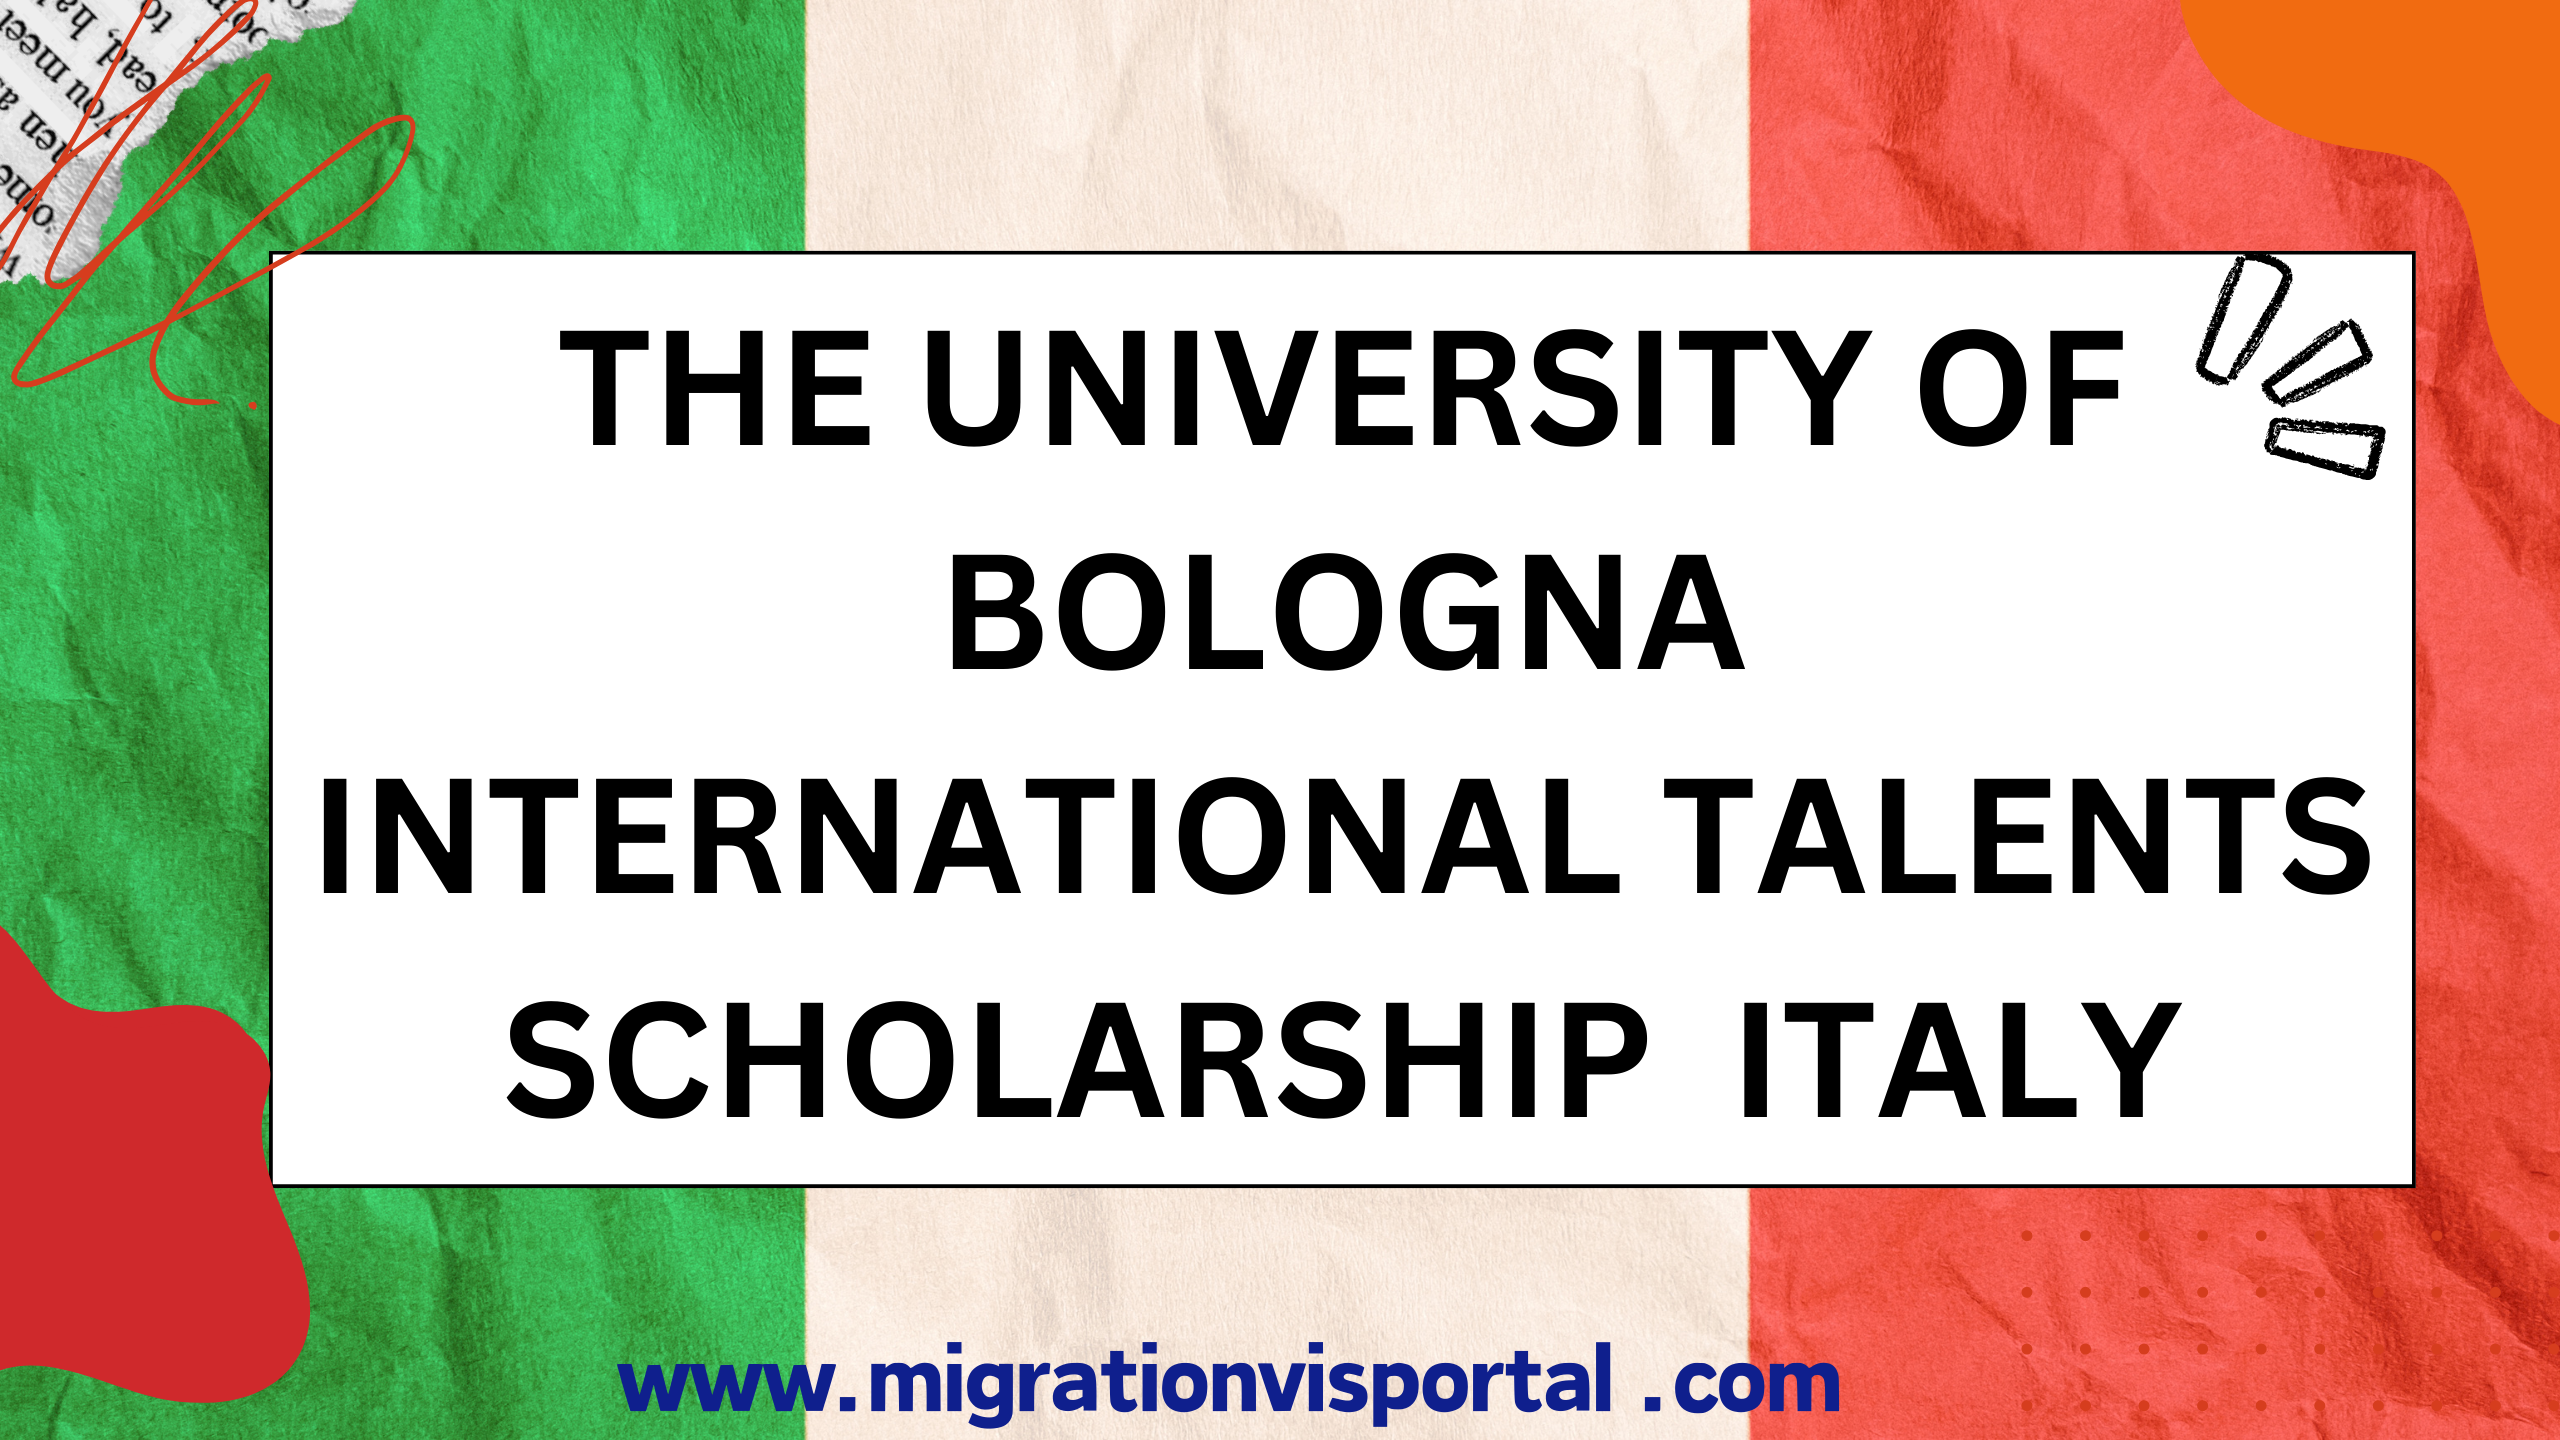 Discover the opportunity: The University of Bologna International Talents Scholarship in Italy